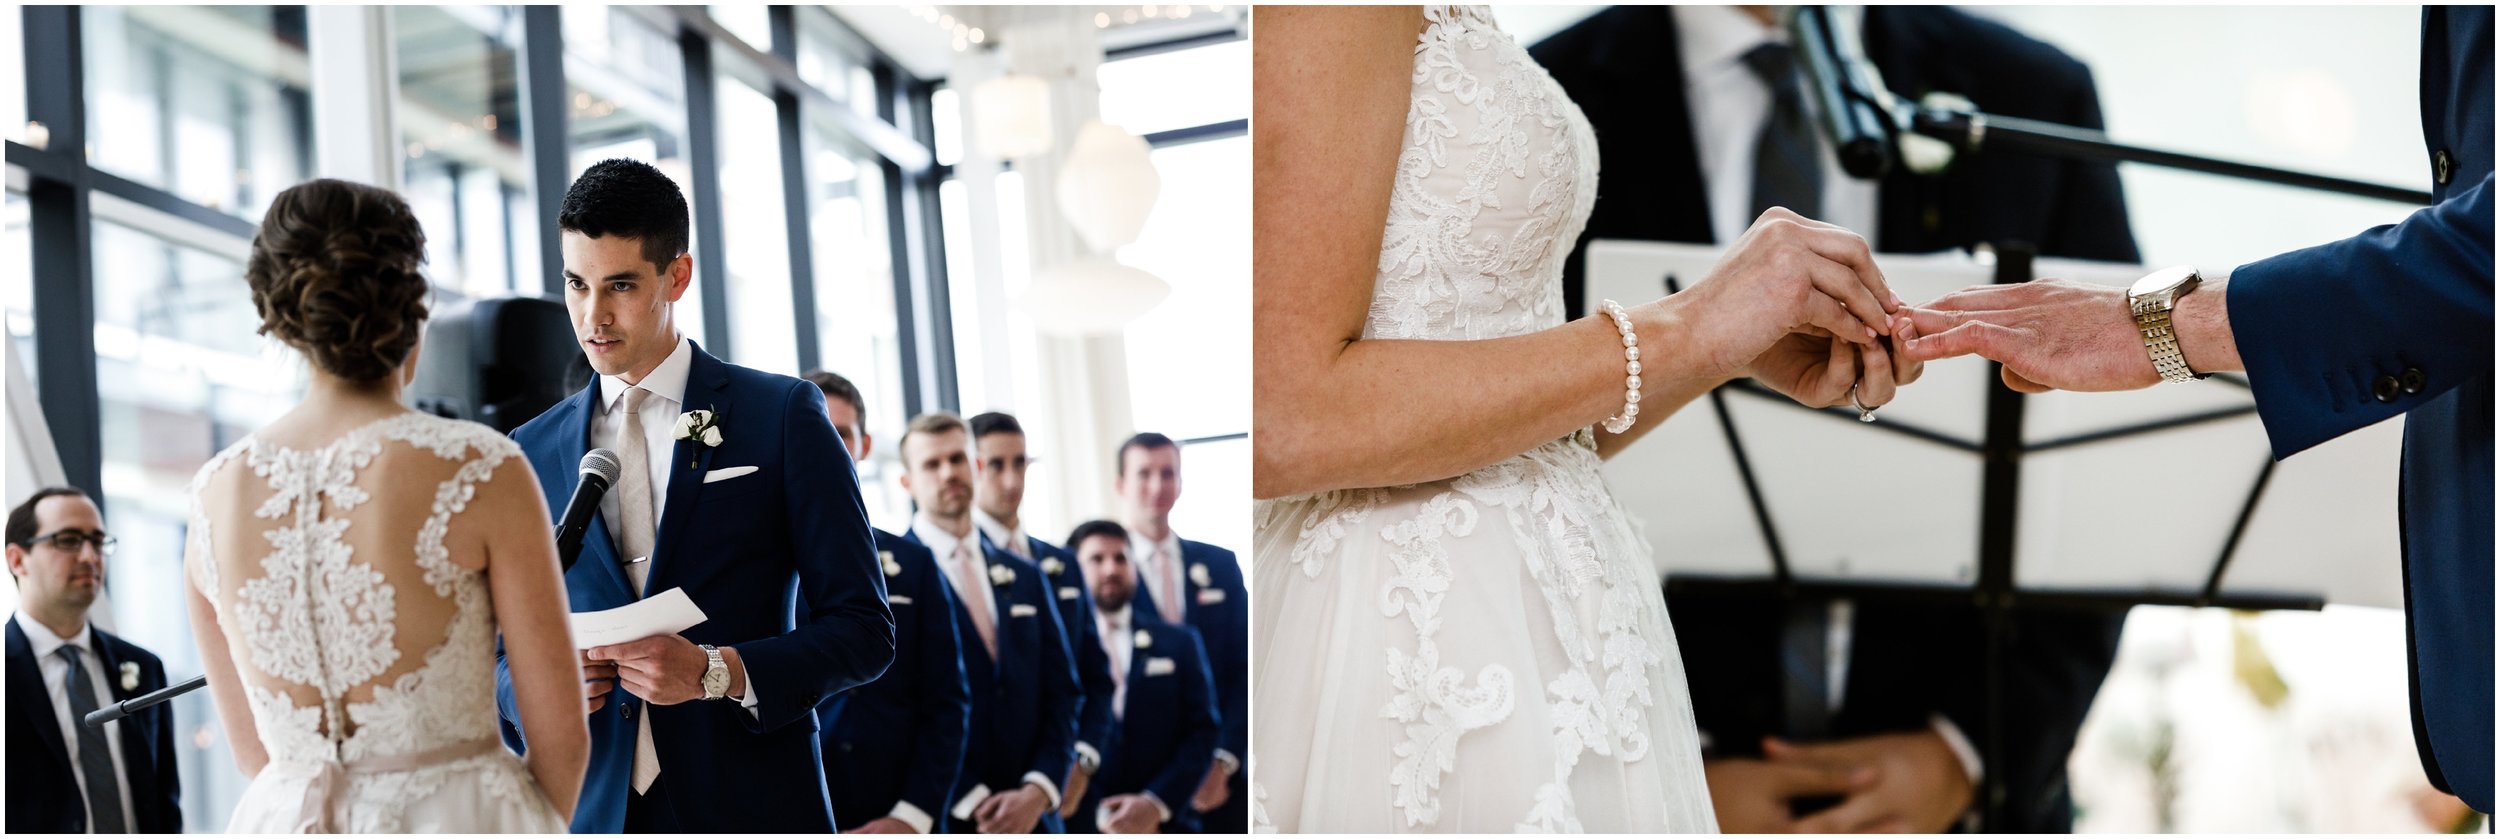 groom reading wedding vows at Greenhouse Loft in Chicago